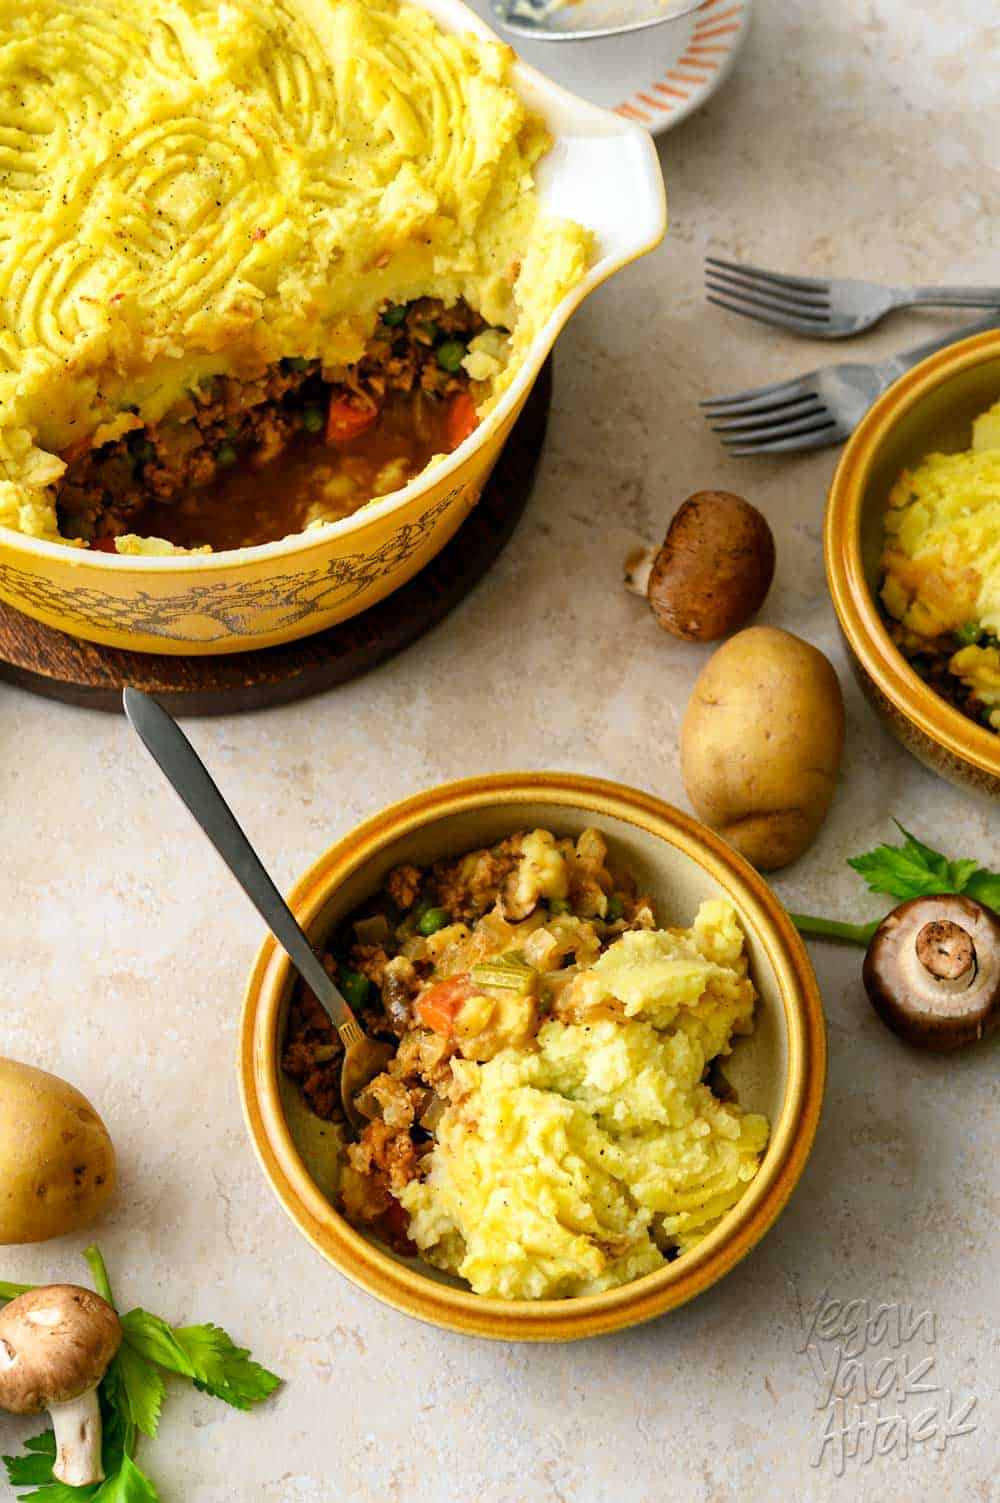 One casserole dish filled with a vegan shepherd's pie, spooned into two bowls, with potatoes and mushrooms scattered around them, on a light linoleum background.